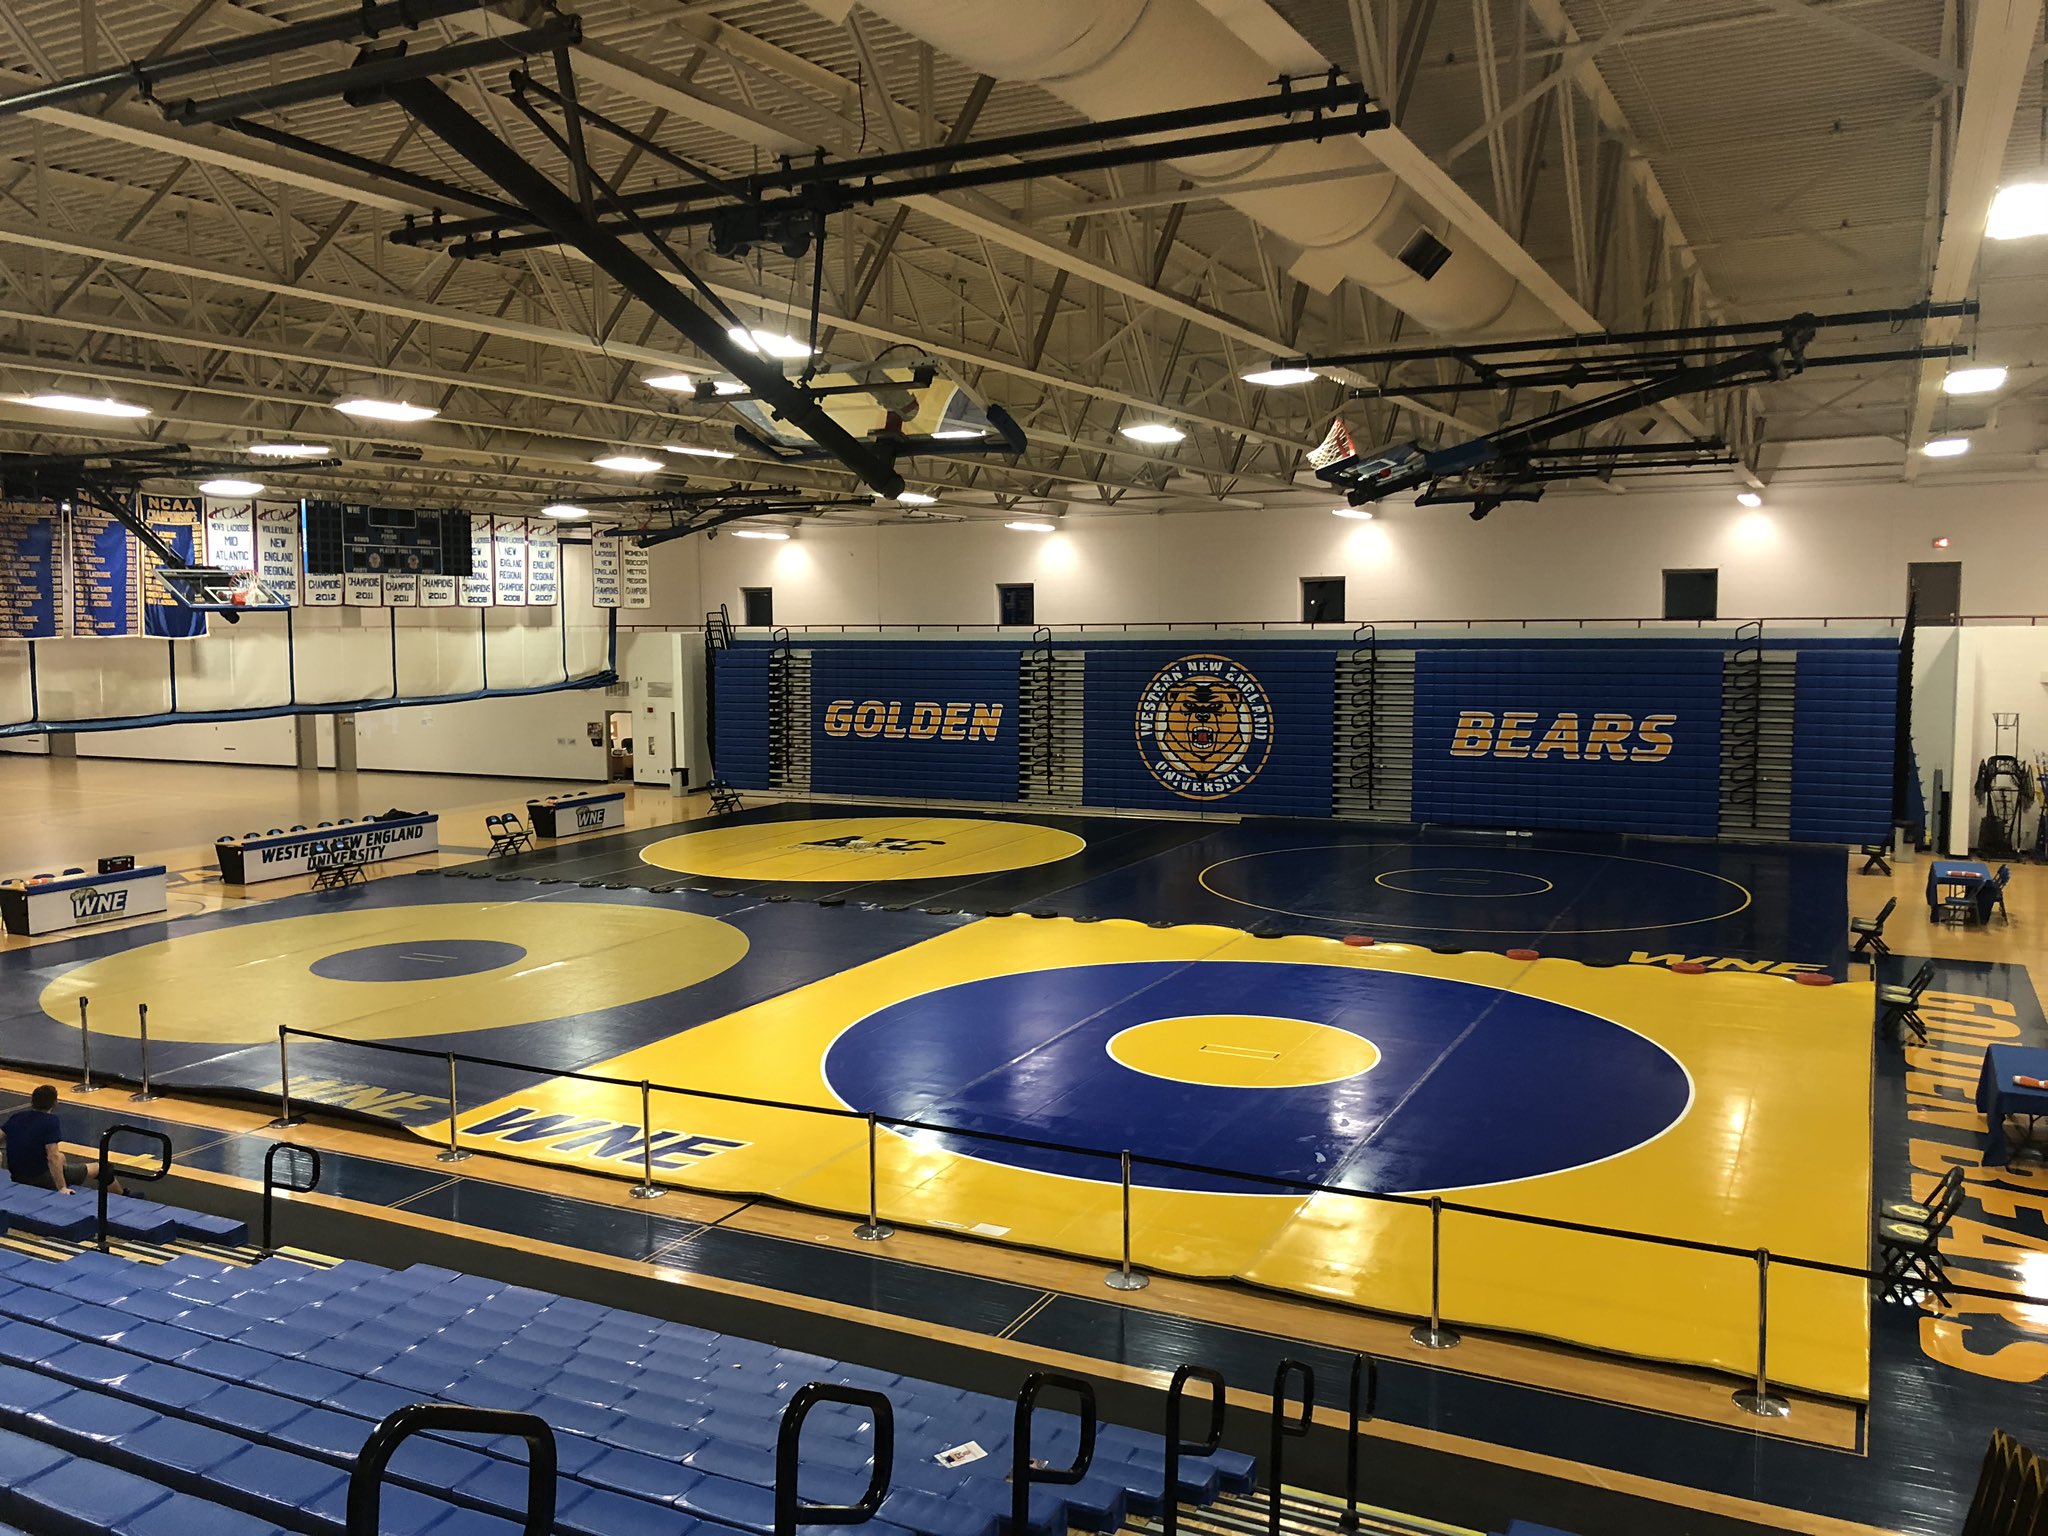 WNE WRESTLING on Twitter "Western New England is set to host the 2020